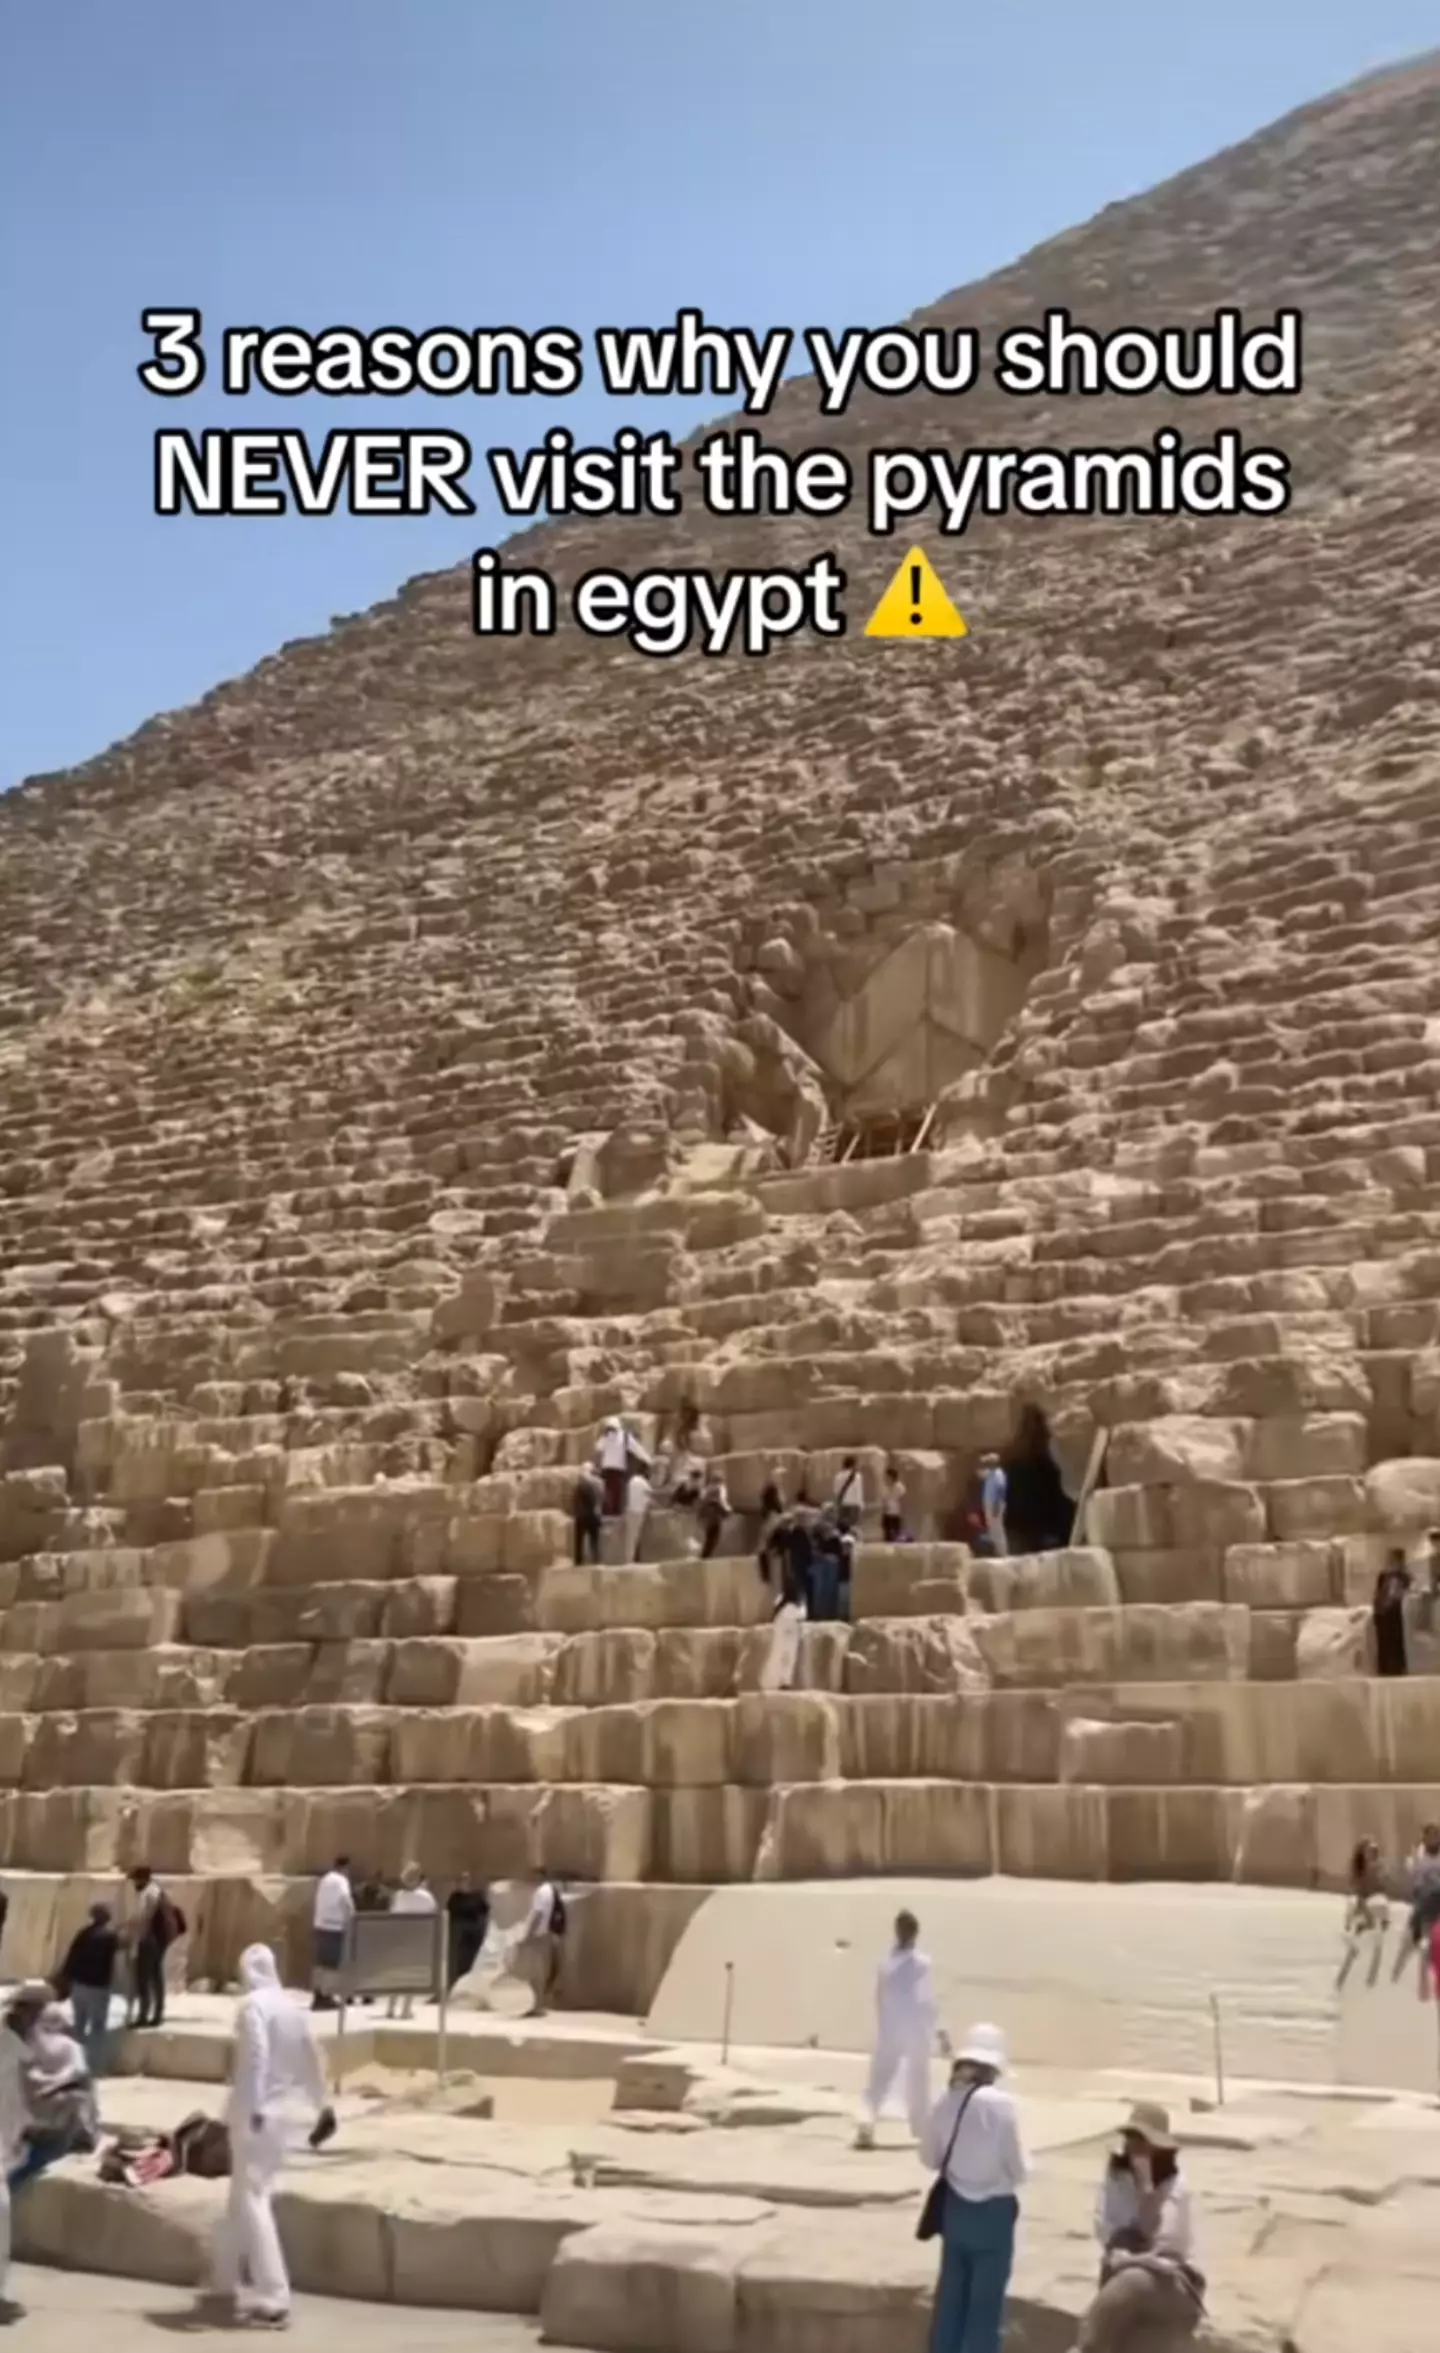 The YouTuber visited the pyramids in Egypt.